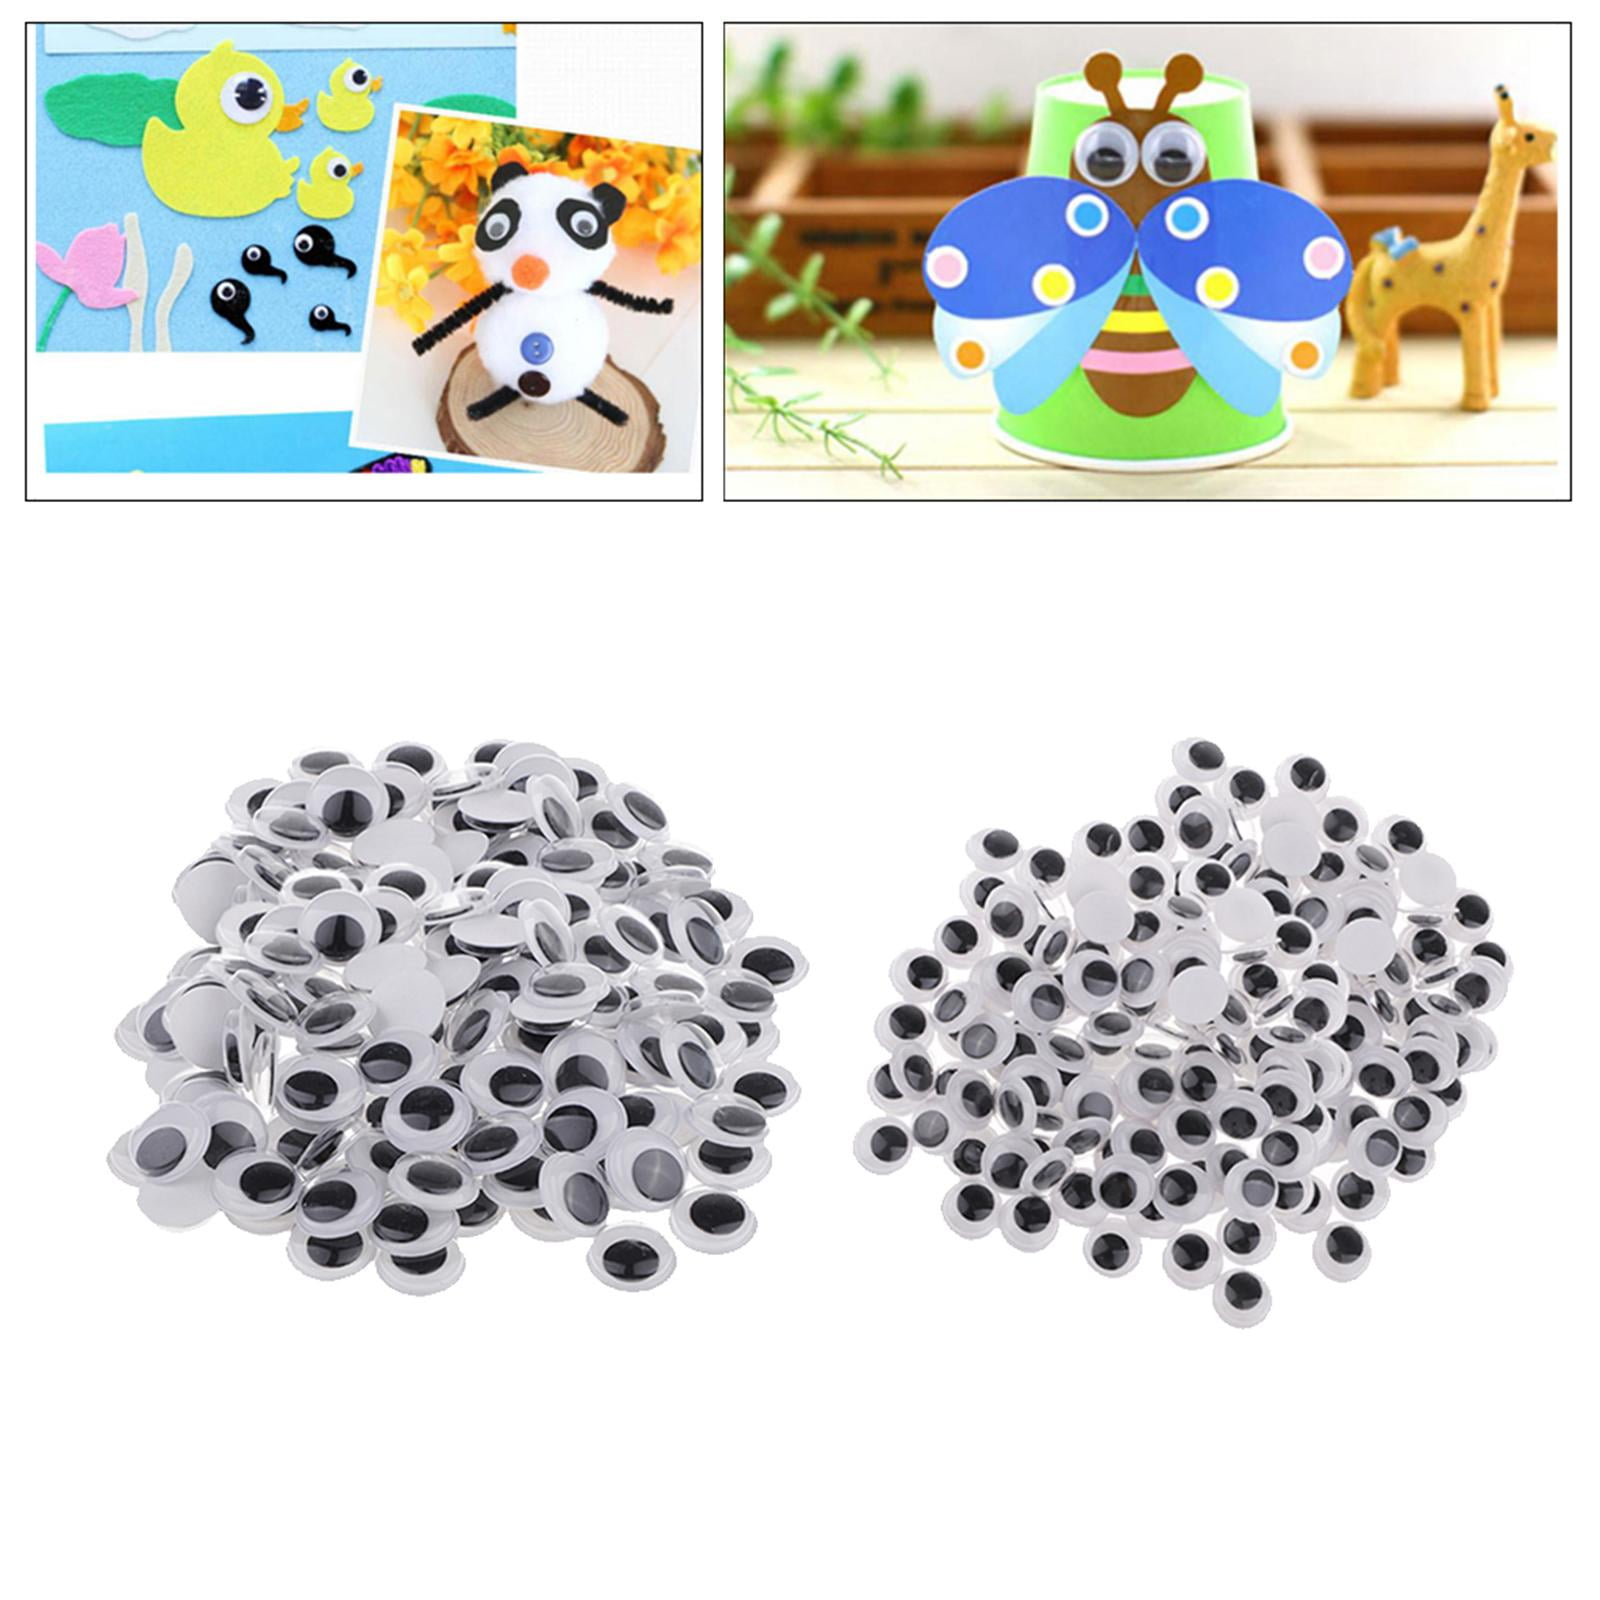 LotFancy Wiggle Googly Eyes for Crafts, 1100PCS Self-Adhesive